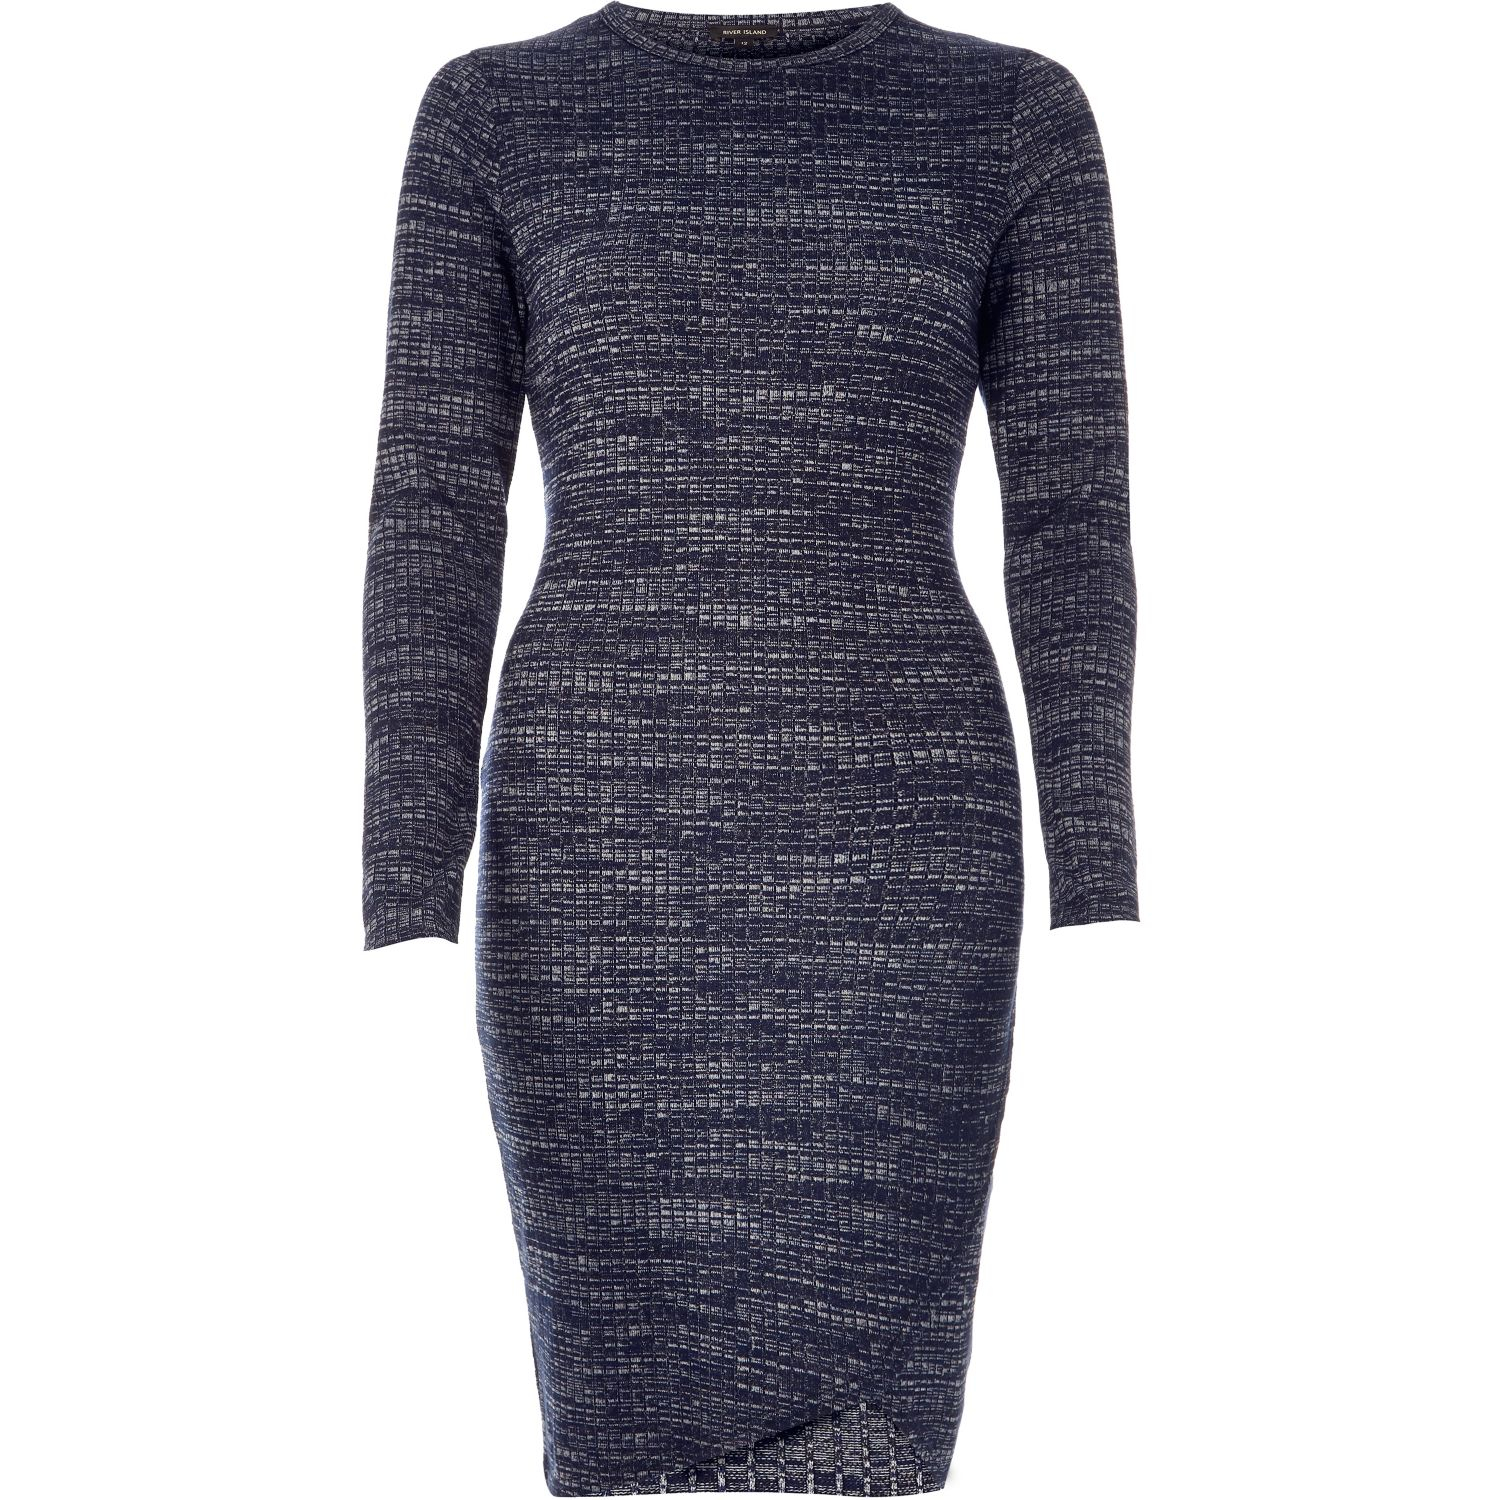 River Island Wrap Bodycon Dress : 35+ Images 2017-2018